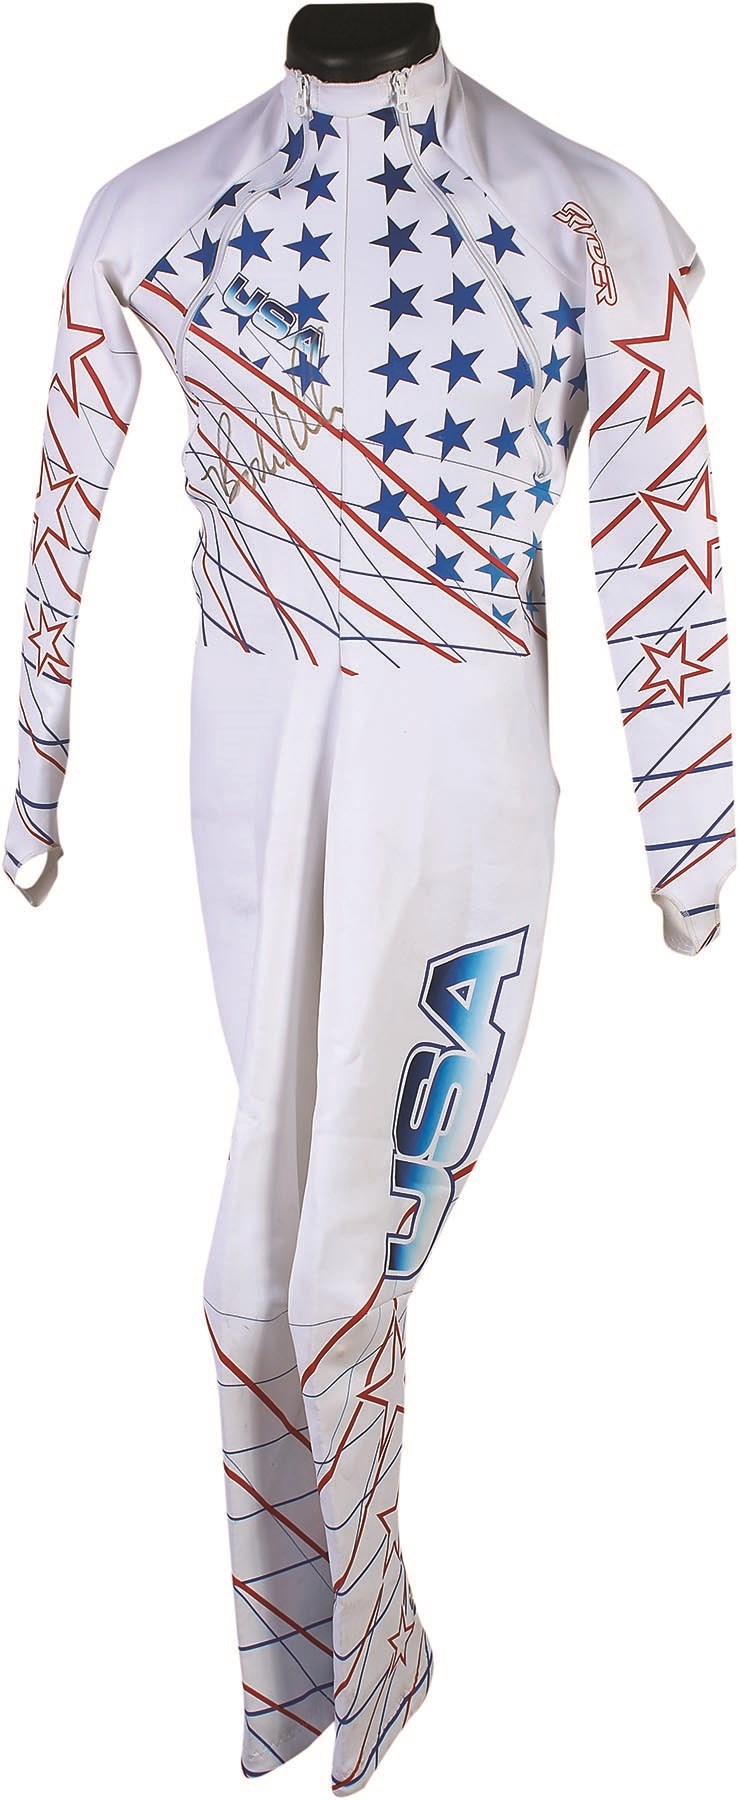 - Bode Miller Signed 2014 Sochi Olympics Race Worn Suit